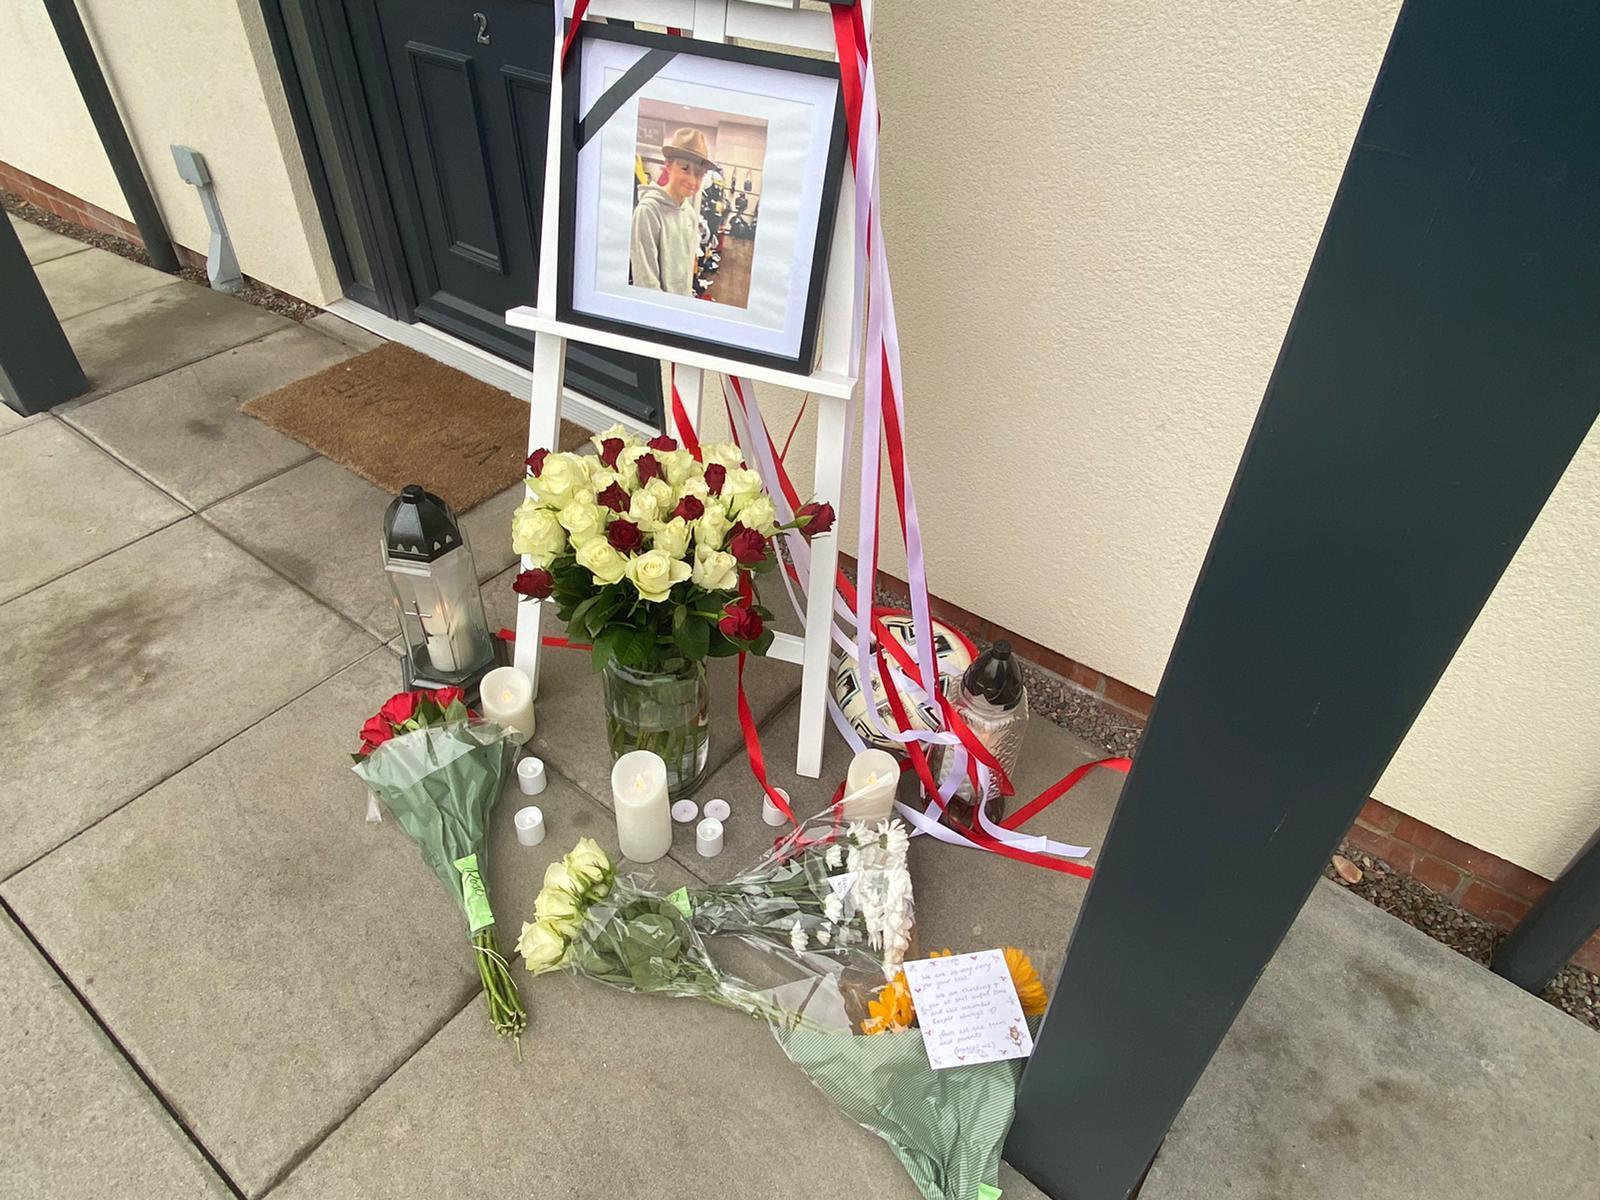 Flowers, candles, and messages have been left for Kacper Biela